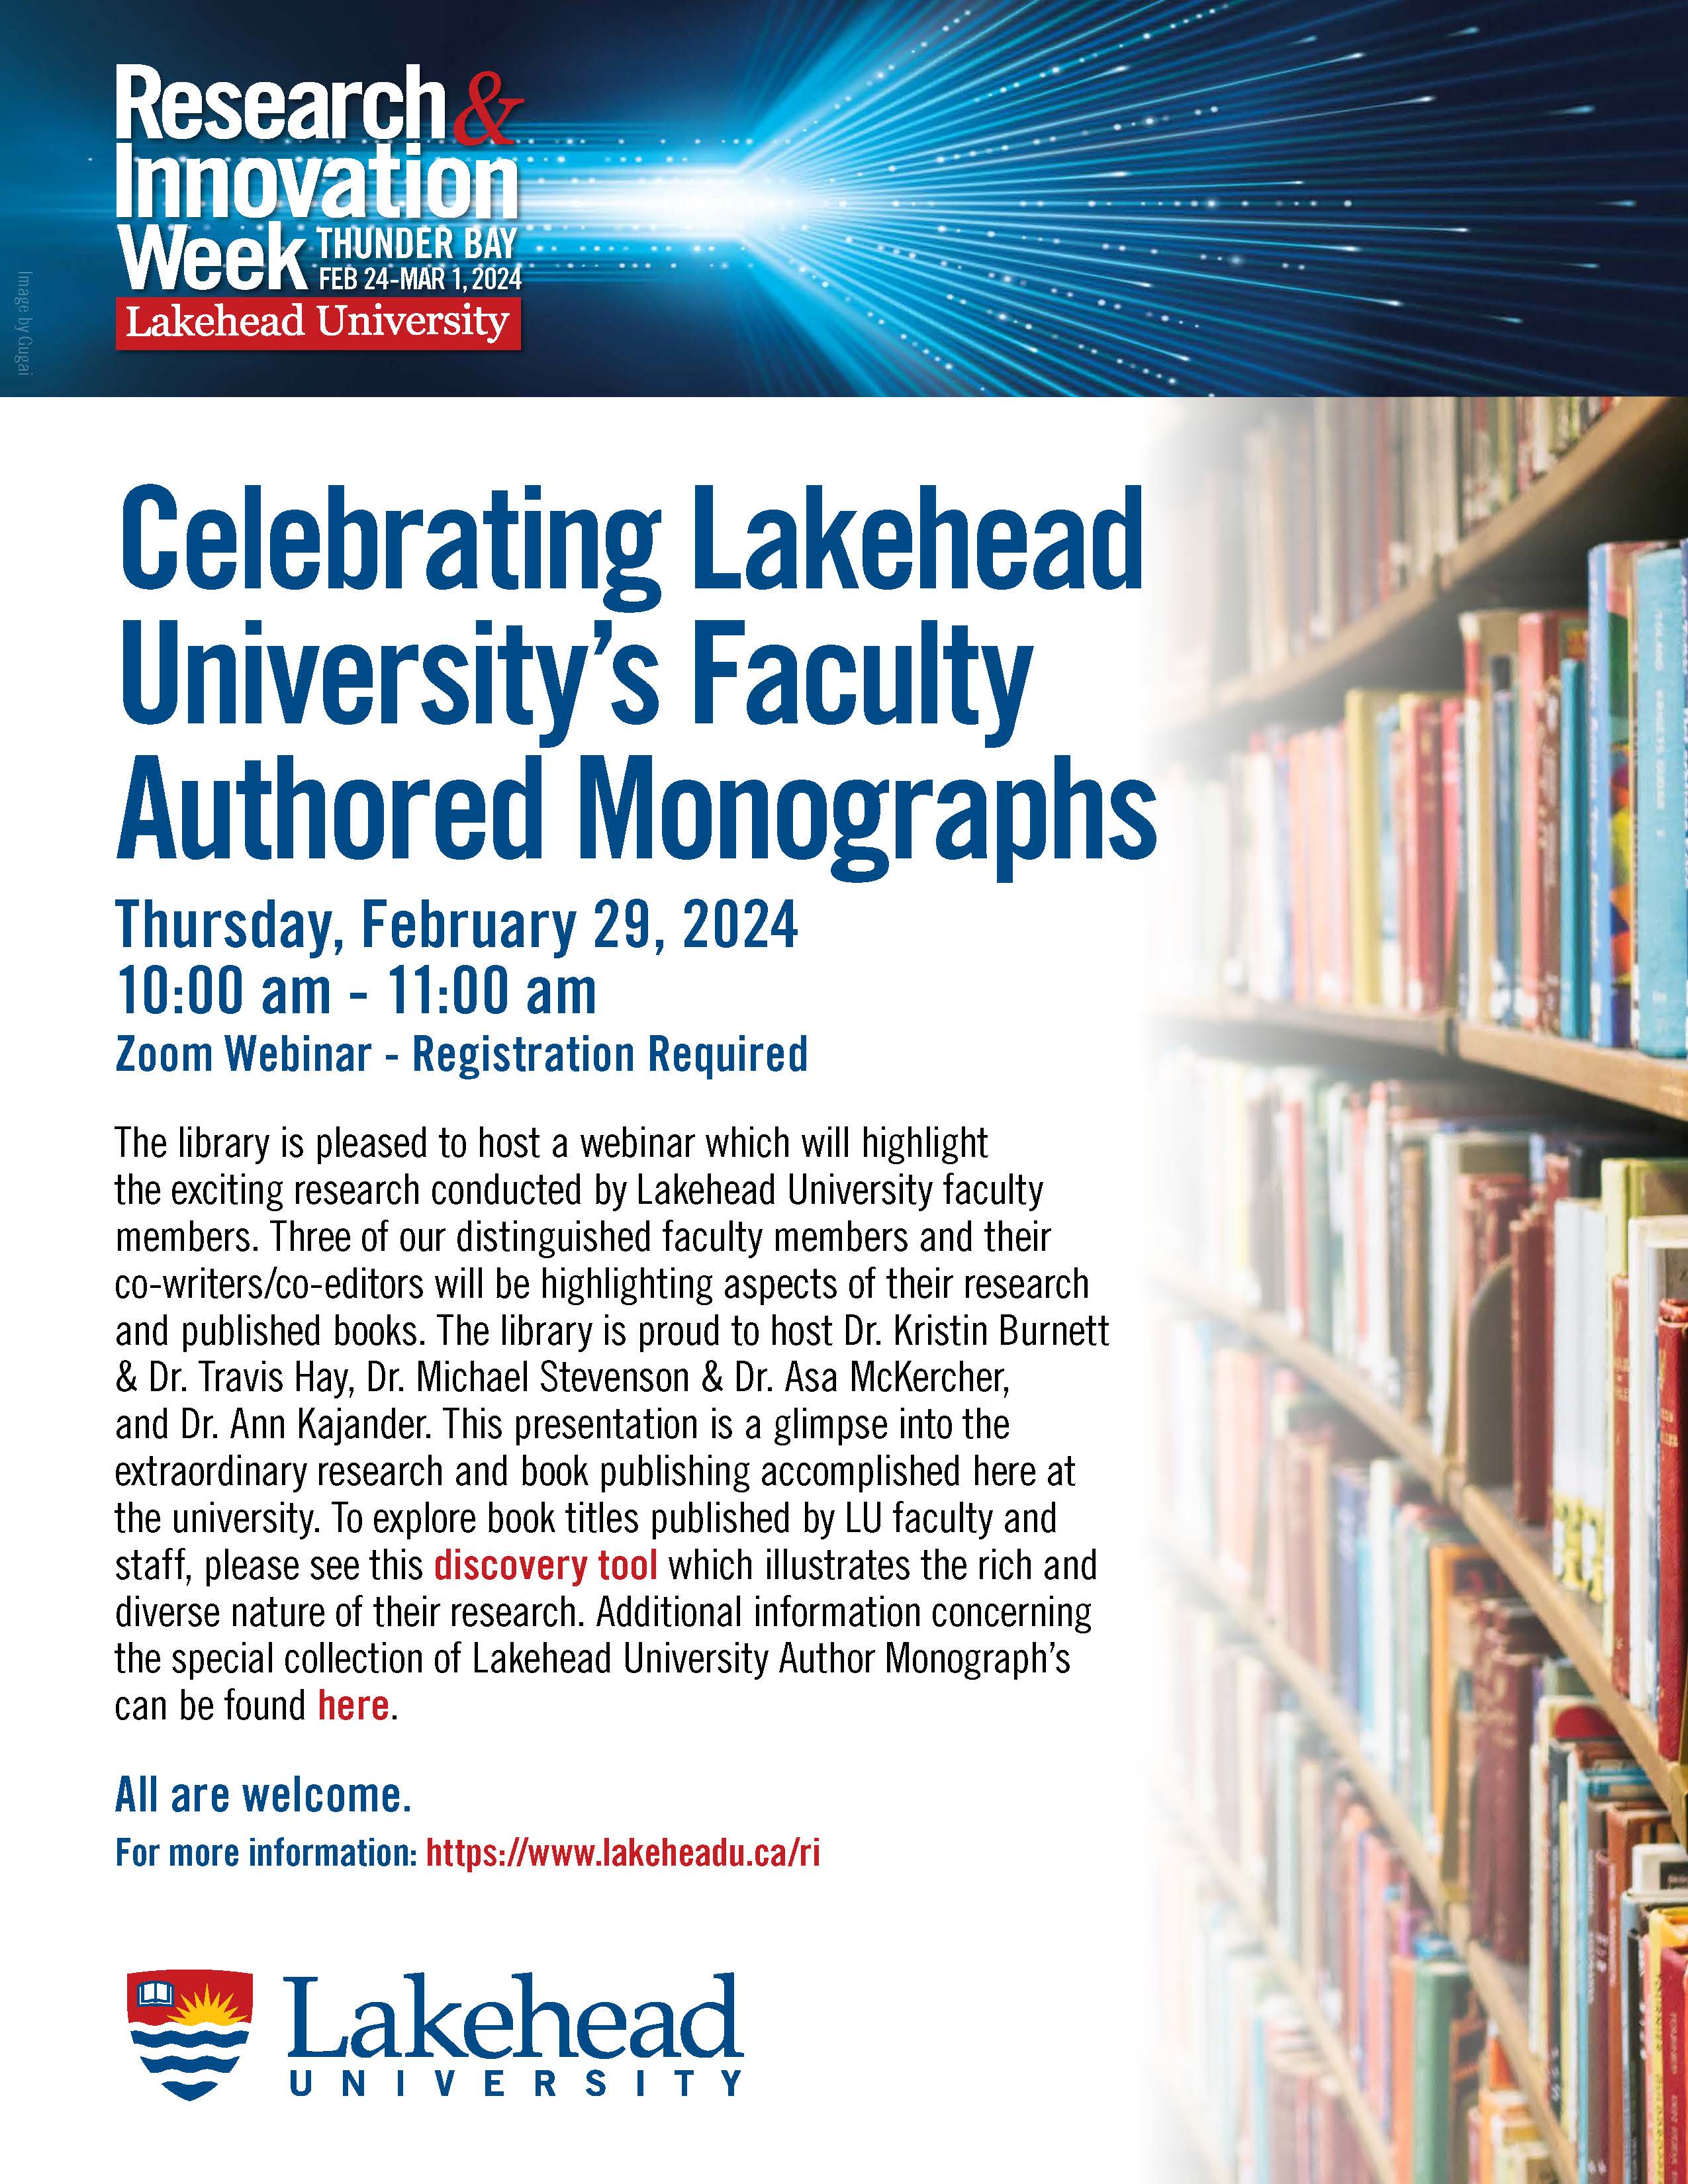 Event Poster for Celebrating Lakehead University’s Faculty Authored Monographs